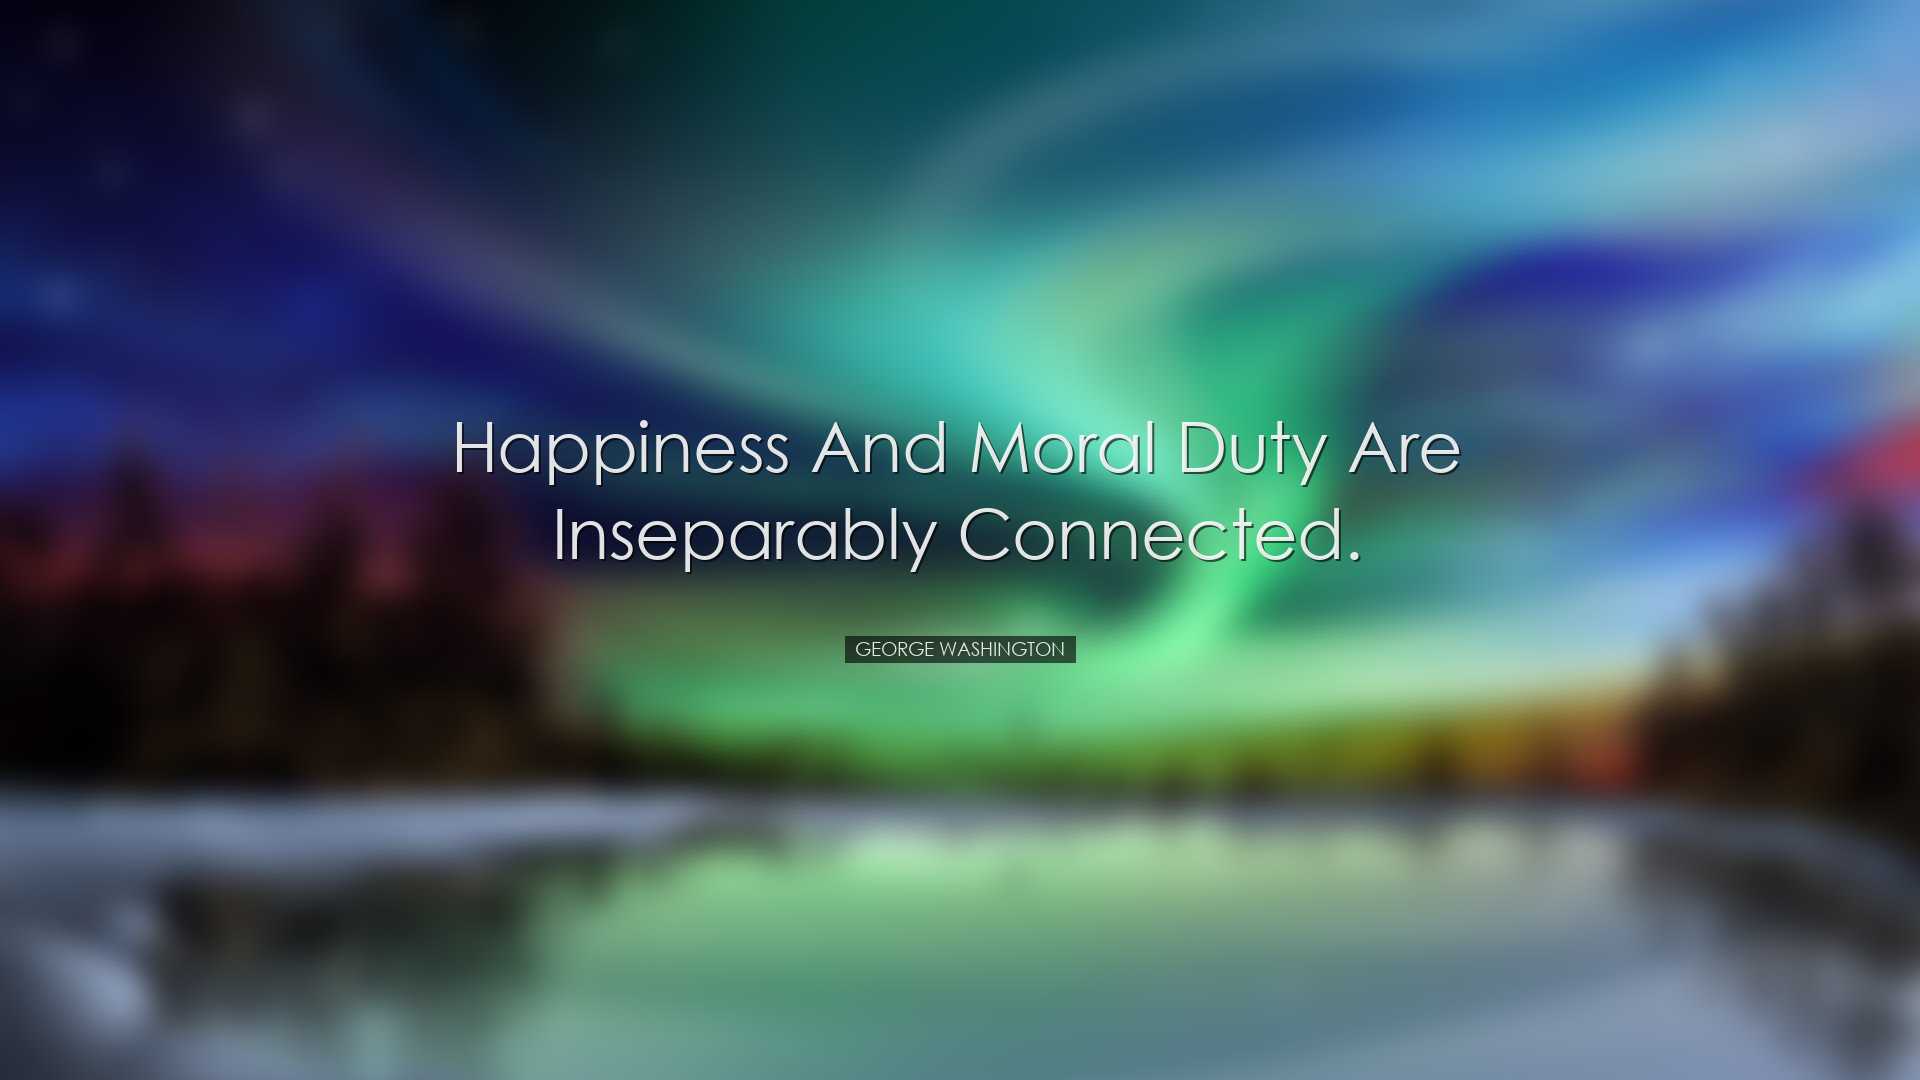 Happiness and moral duty are inseparably connected. - George Washi